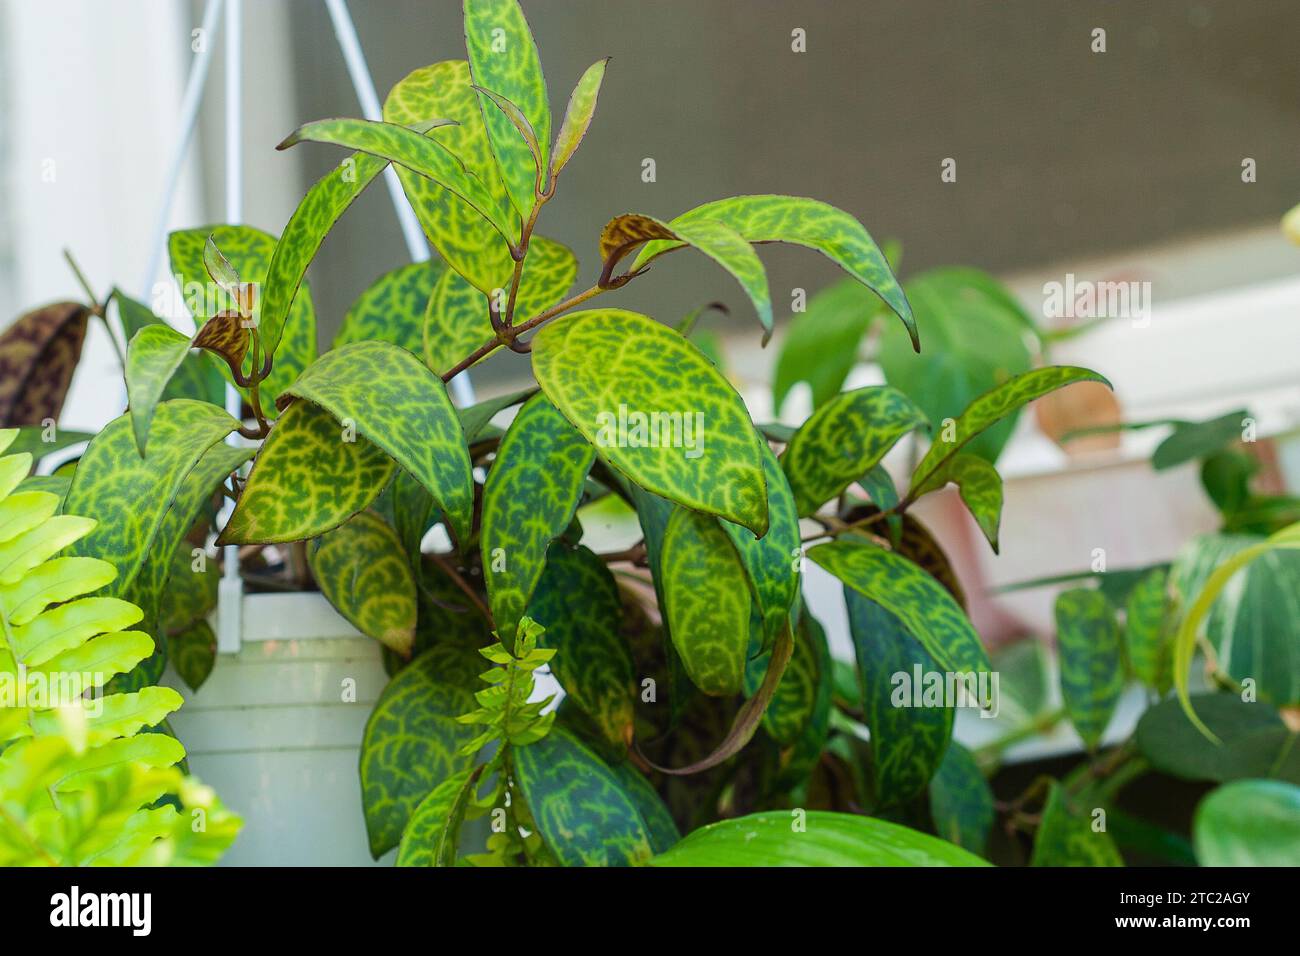 Aeschynanthus marmoratus or Zebra Basket Vine Trailing House plant accompanied with other house plants Stock Photo